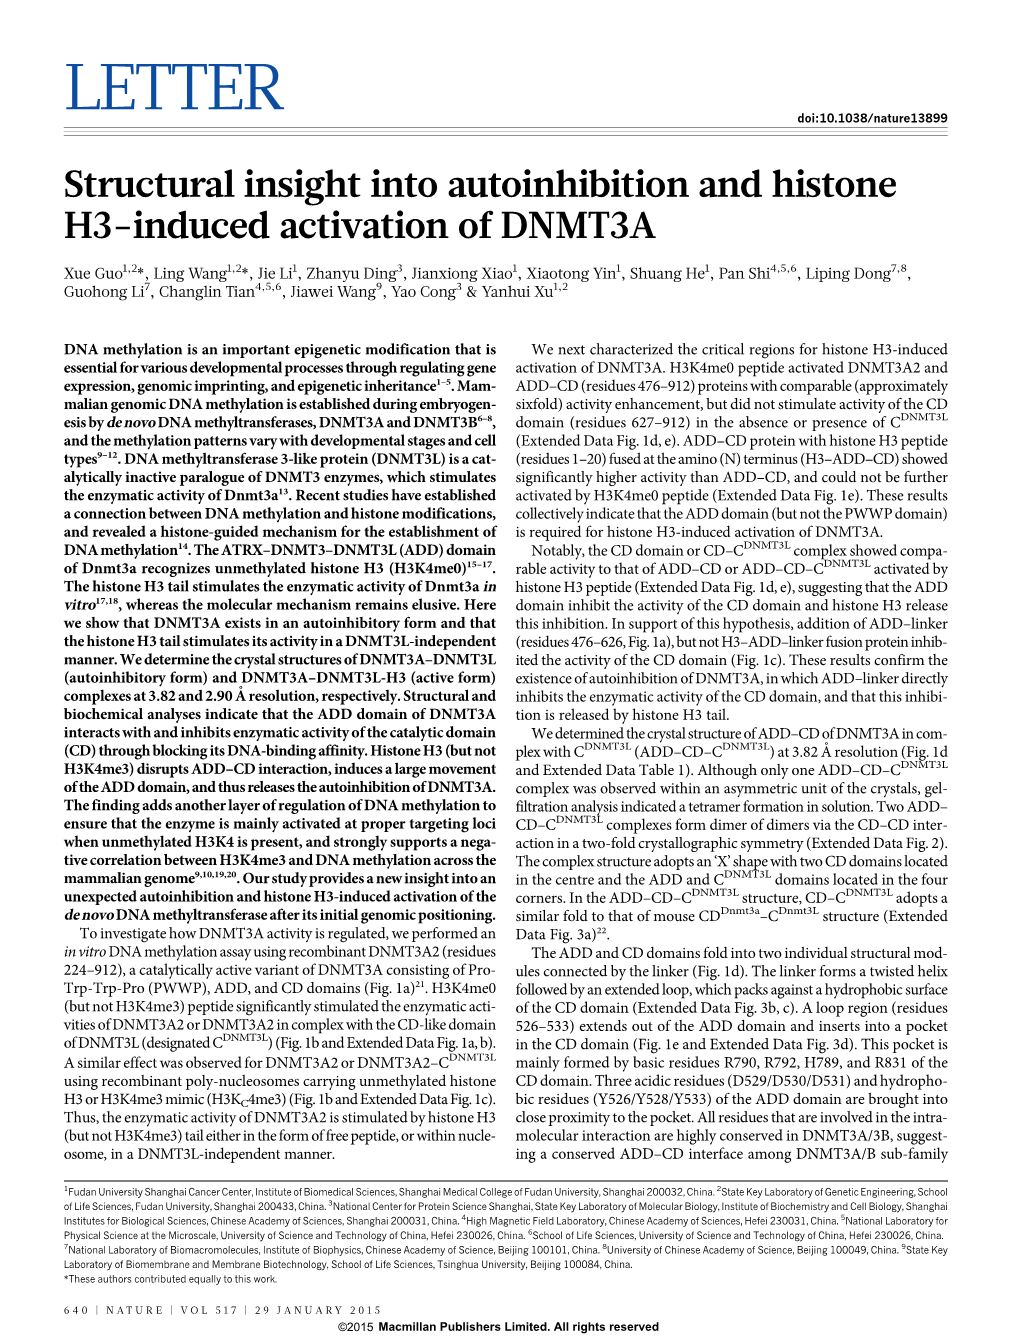 Structural Insight Into Autoinhibition and Histone H3-Induced Activation of DNMT3A